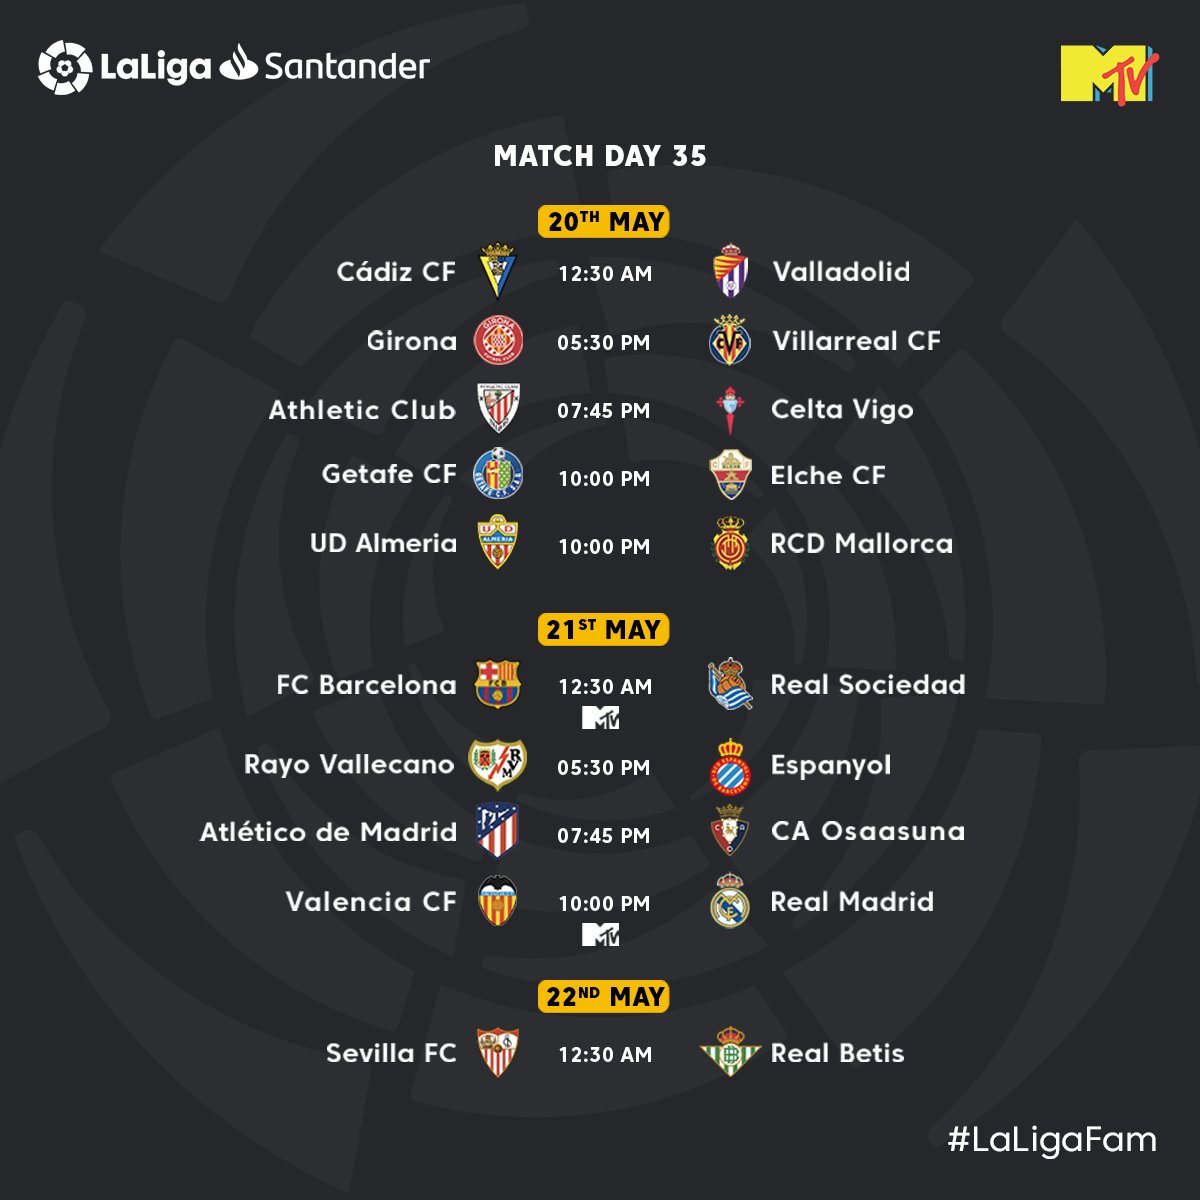 Save the dates! ⏰

This high-octane action is about to boggle your mind!

#LaLigaSantander #LaLigaOnMTV #KickoffLaLigaSantander #Schedulecard #LaLigaFam